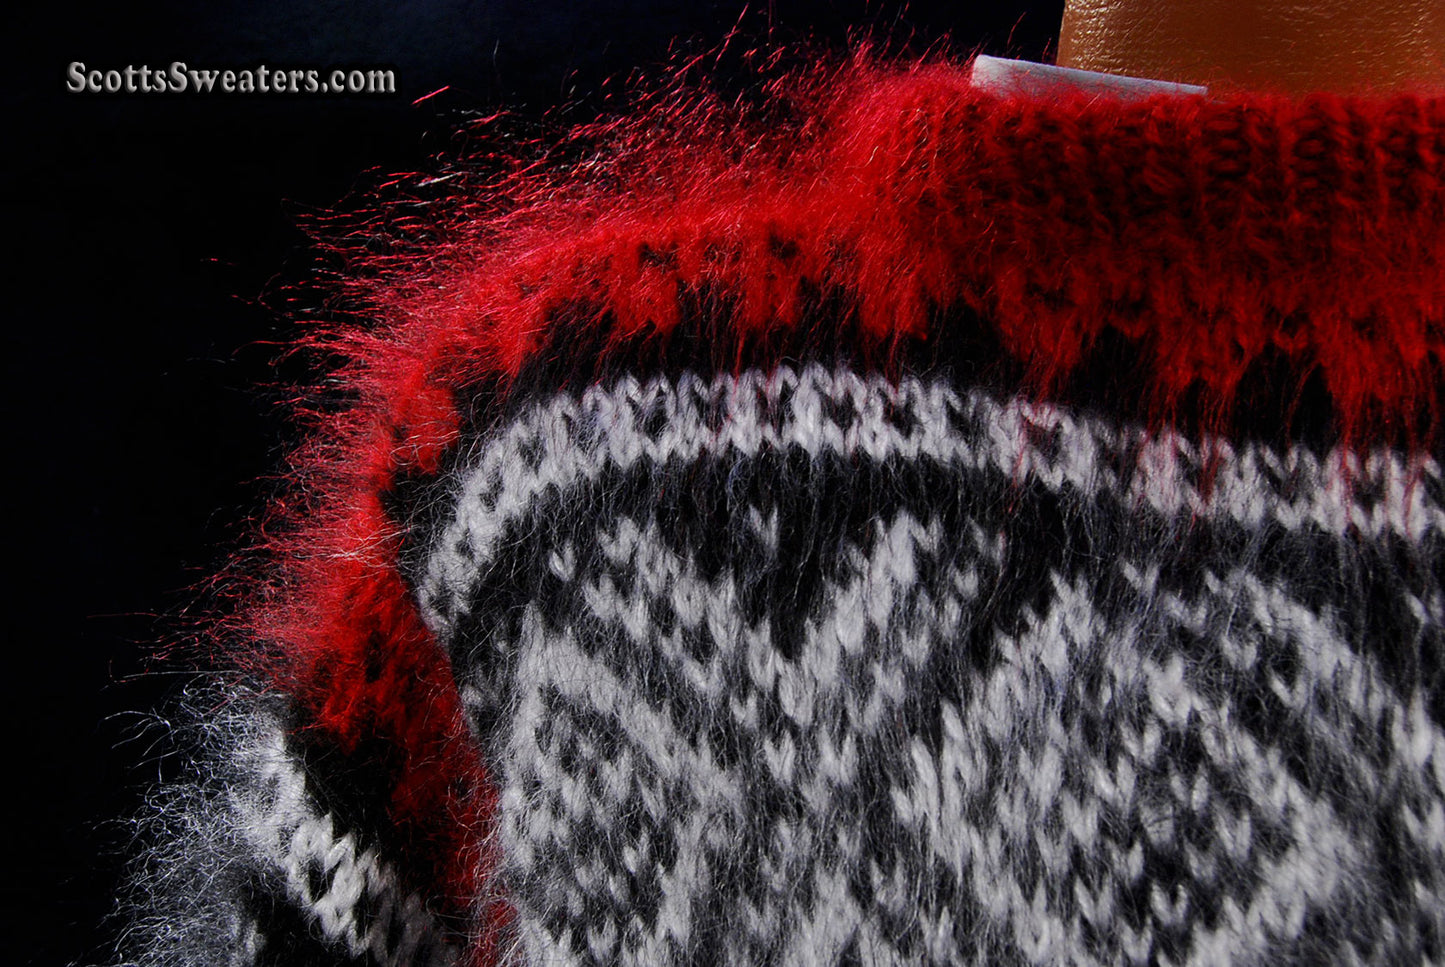 Men's Black Mohair Pullover Crewneck Sweater with Red and White Design [#700-038]